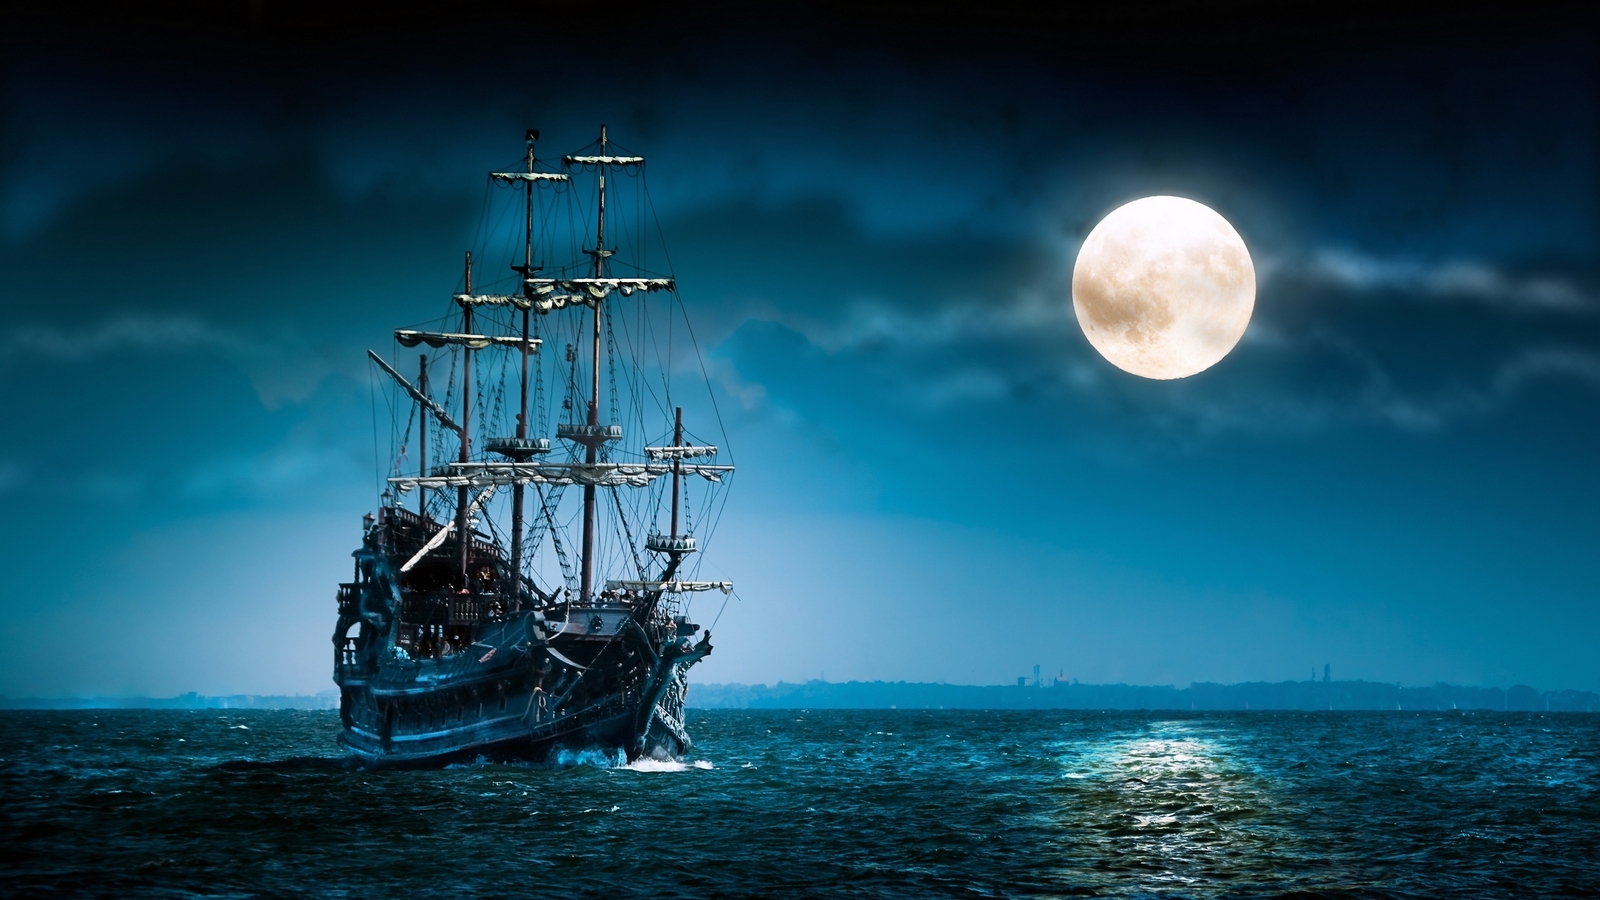 Wallpapers Hd Theme Group - Ship On Sea At Night , HD Wallpaper & Backgrounds